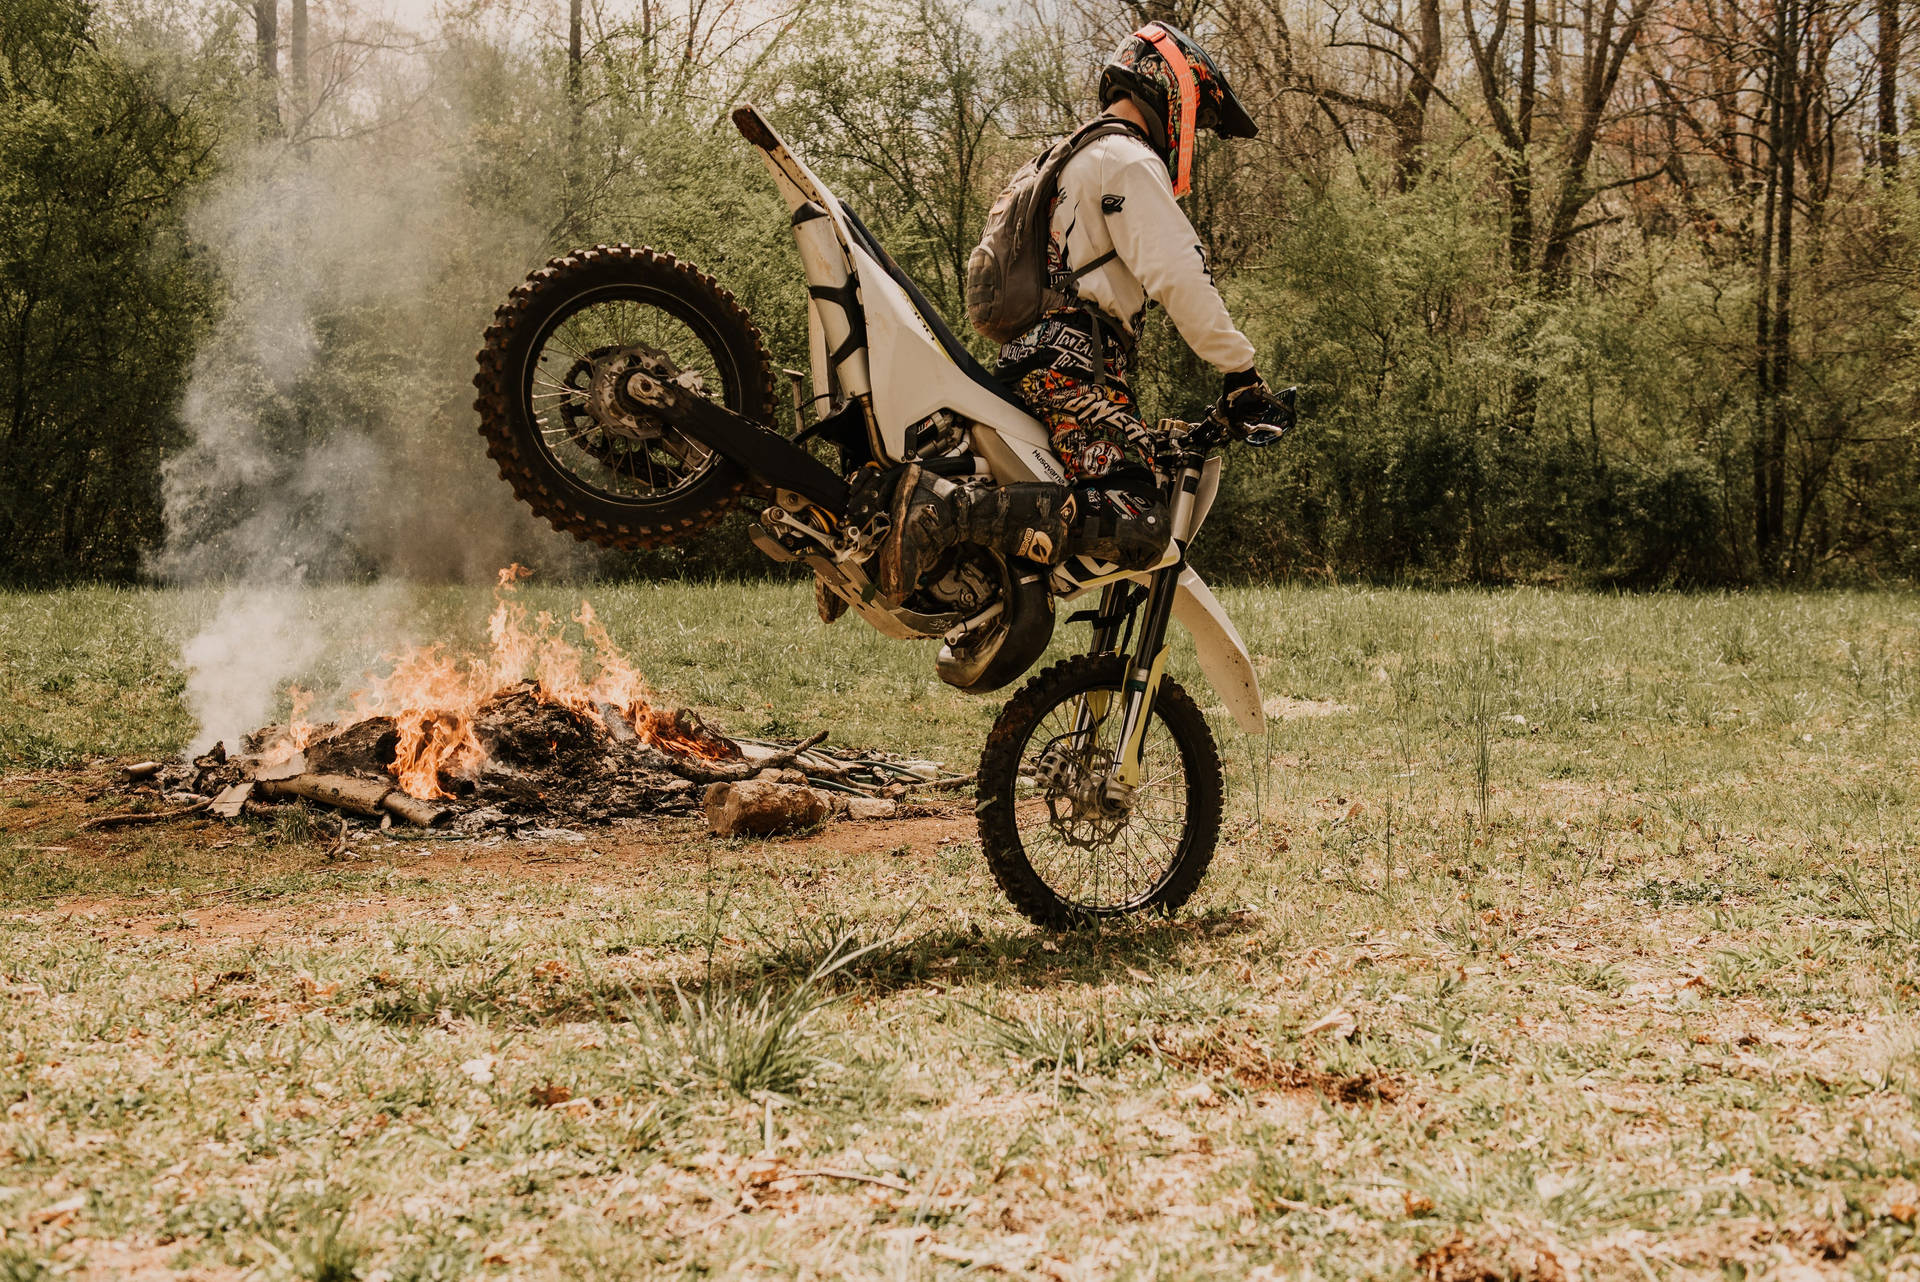 Dirtbike By Campfire